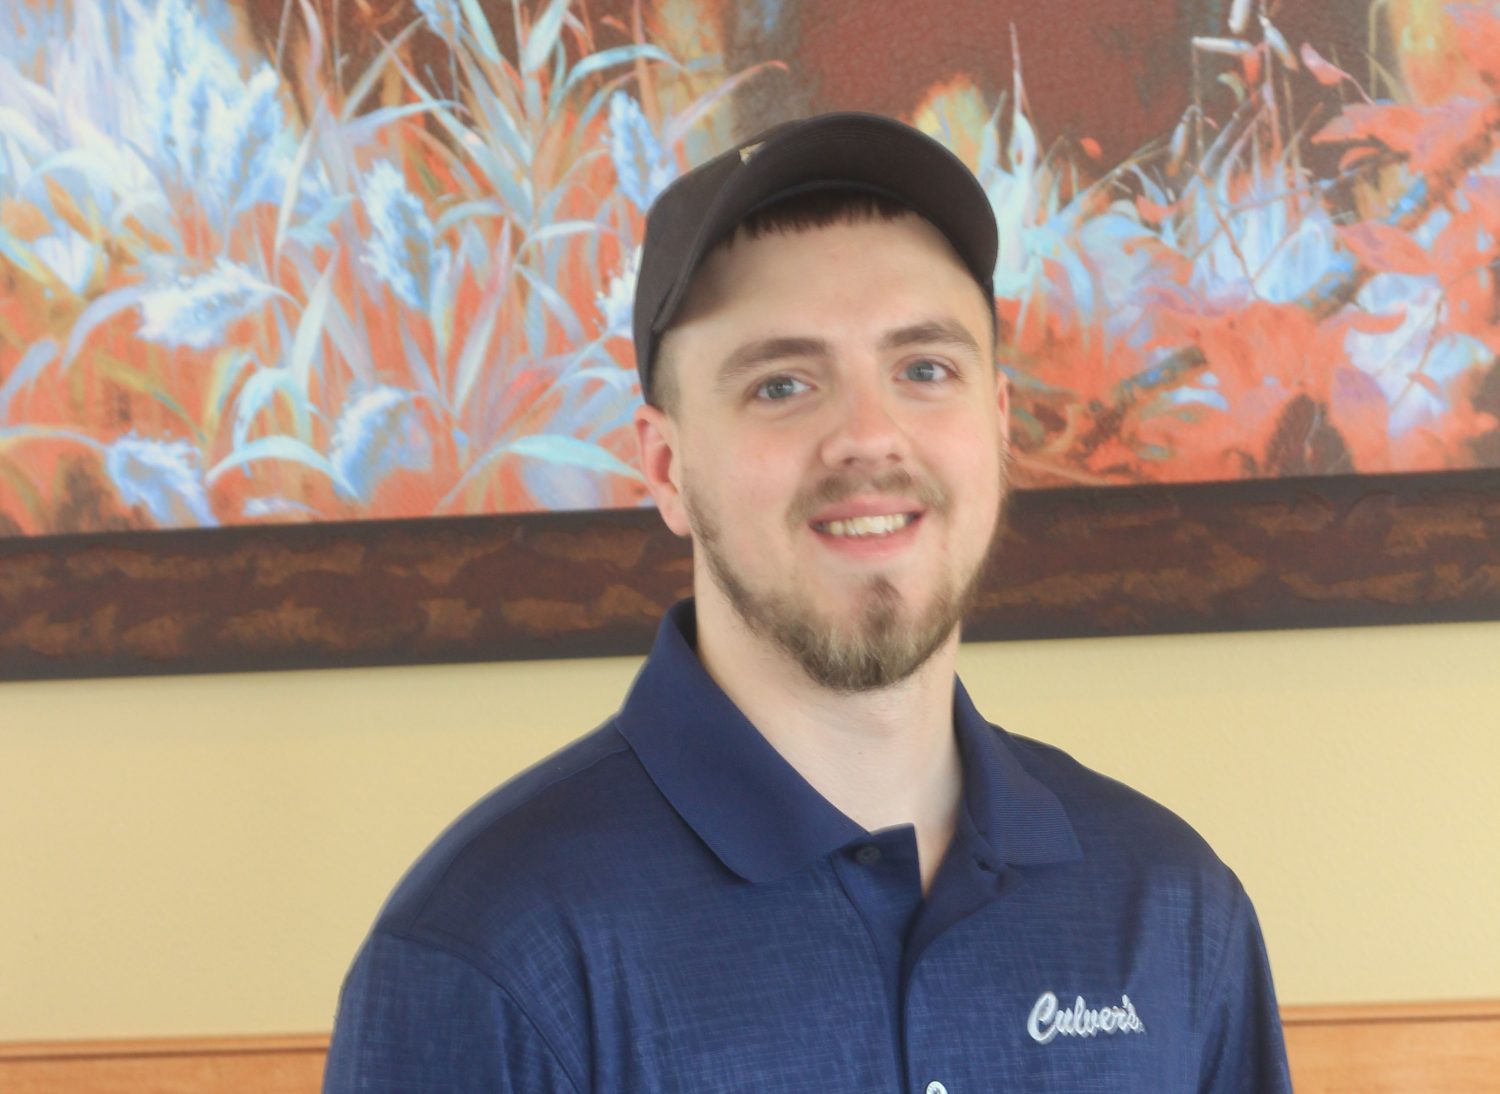 Williams named general manager of Merrill Culver’s